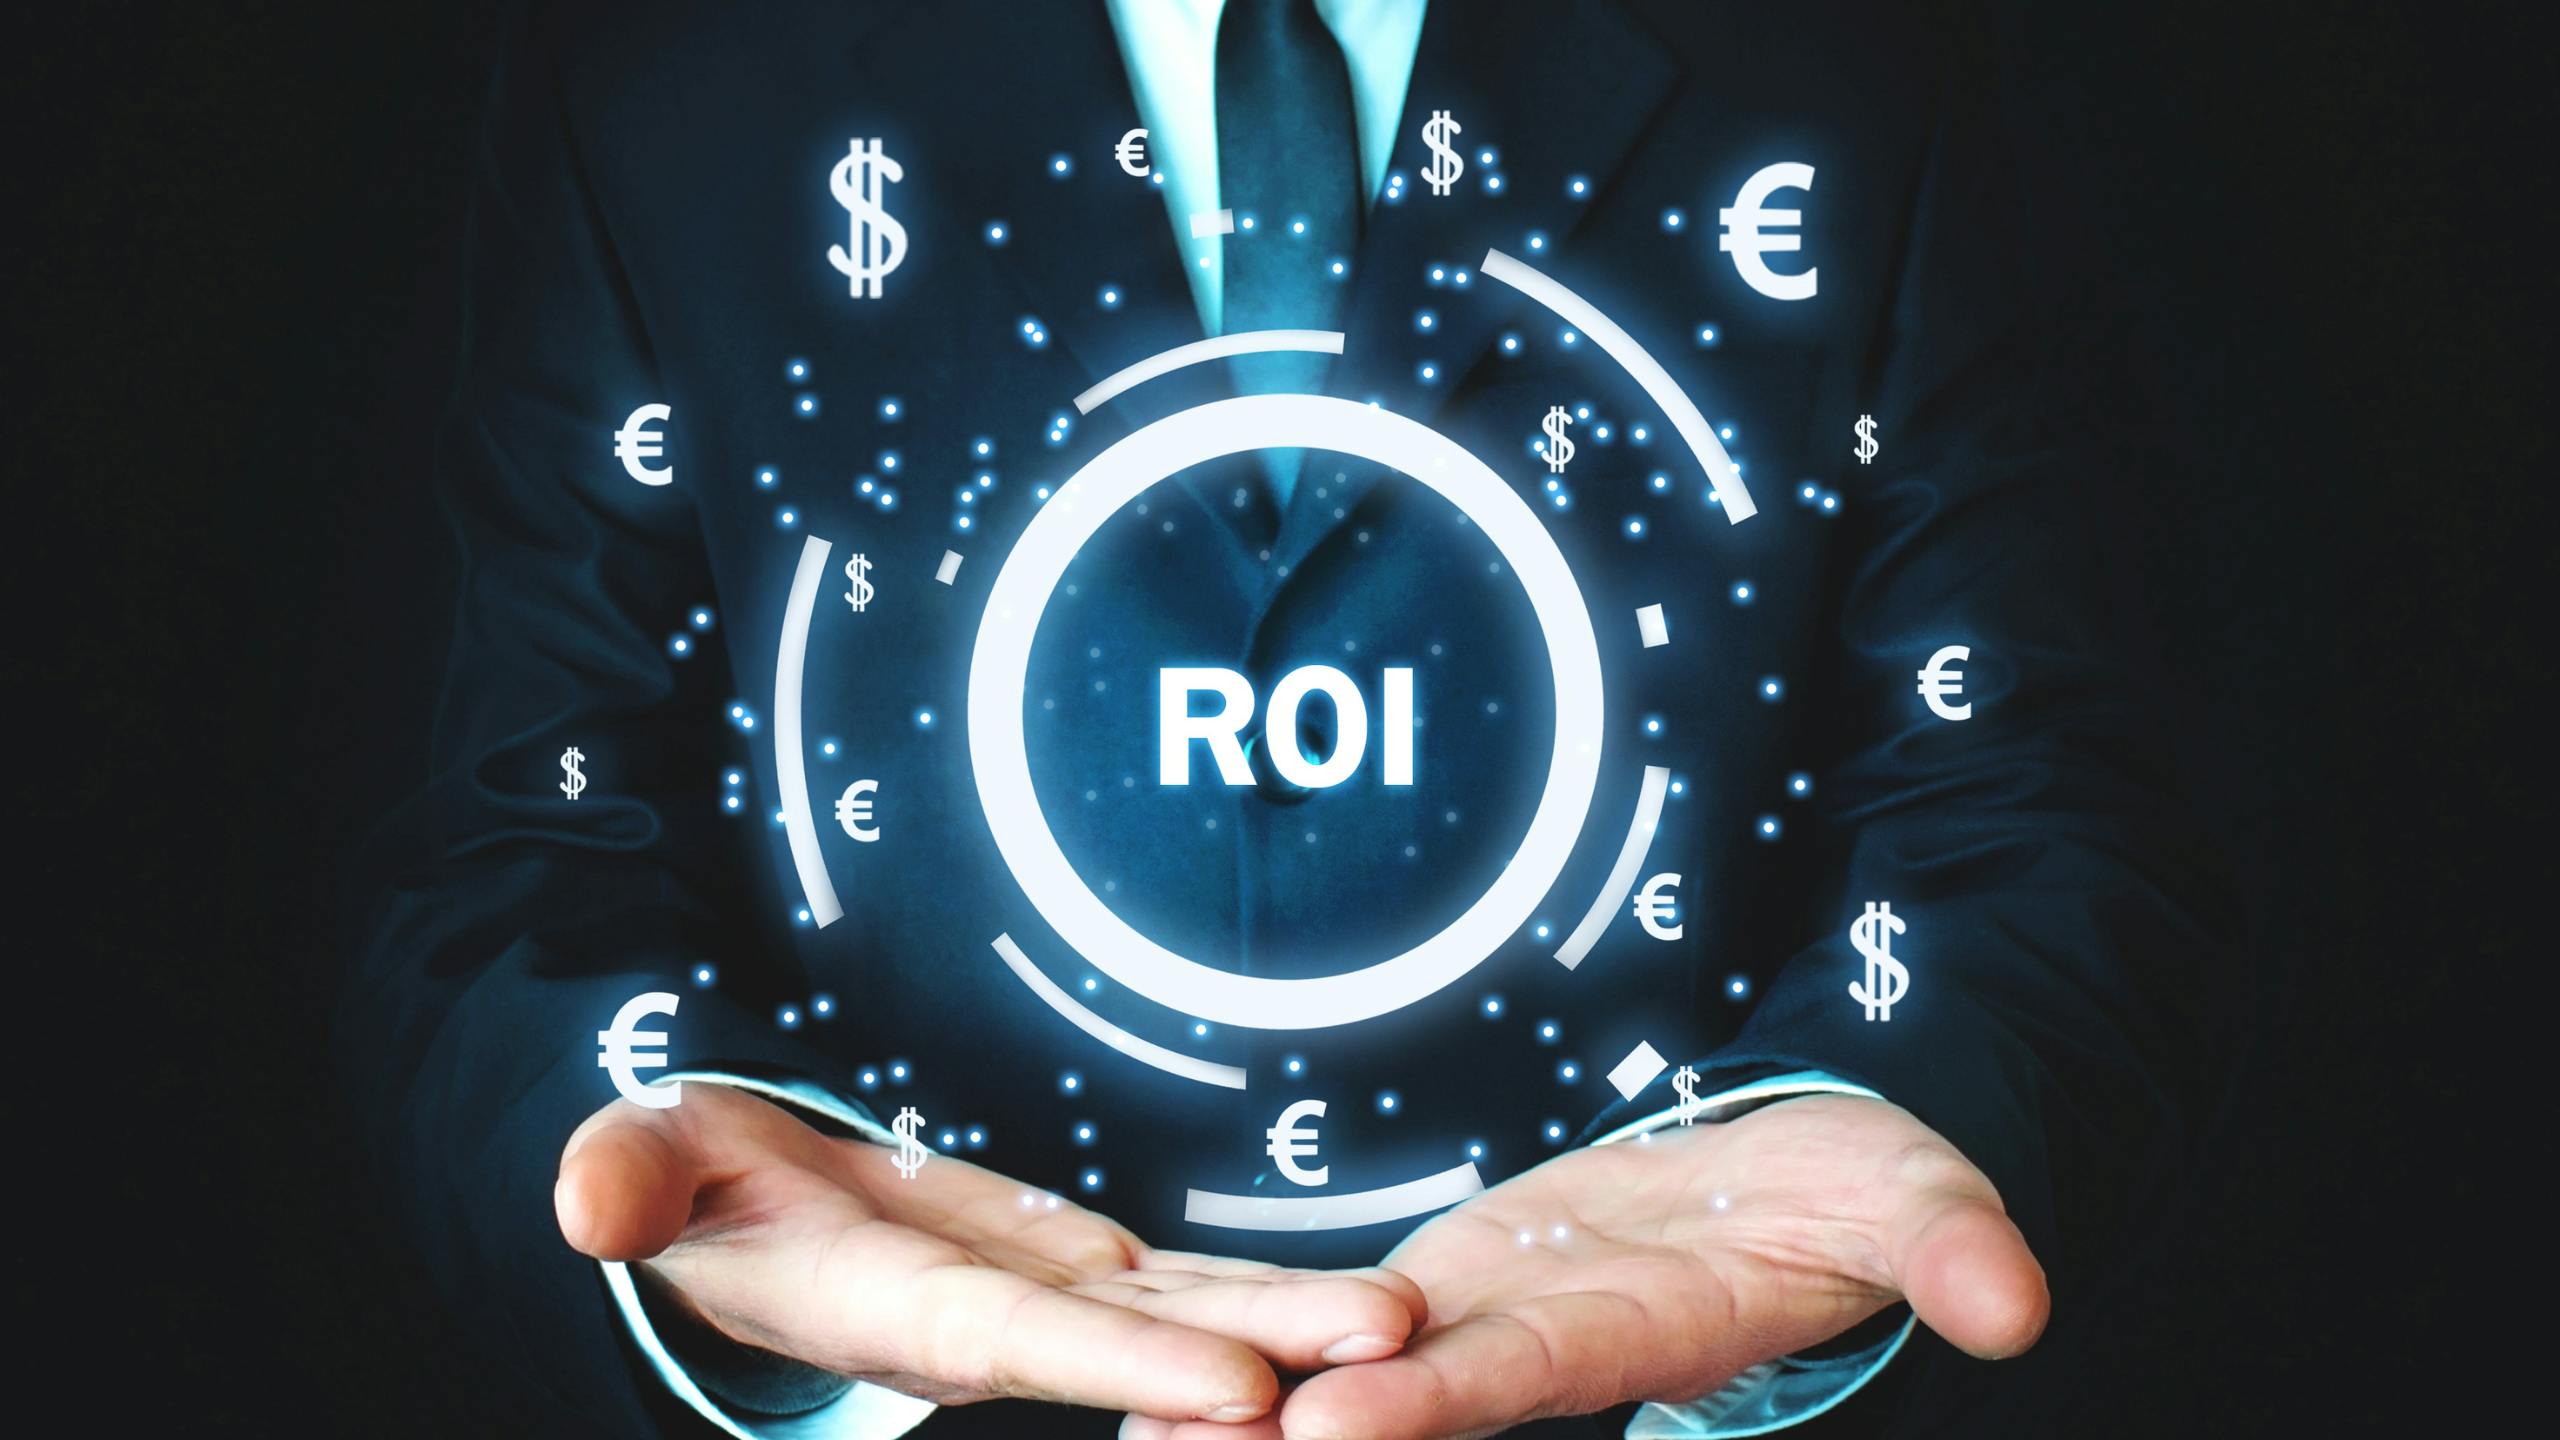 Ensure ROI is a priority for your software project, by using this software development brief